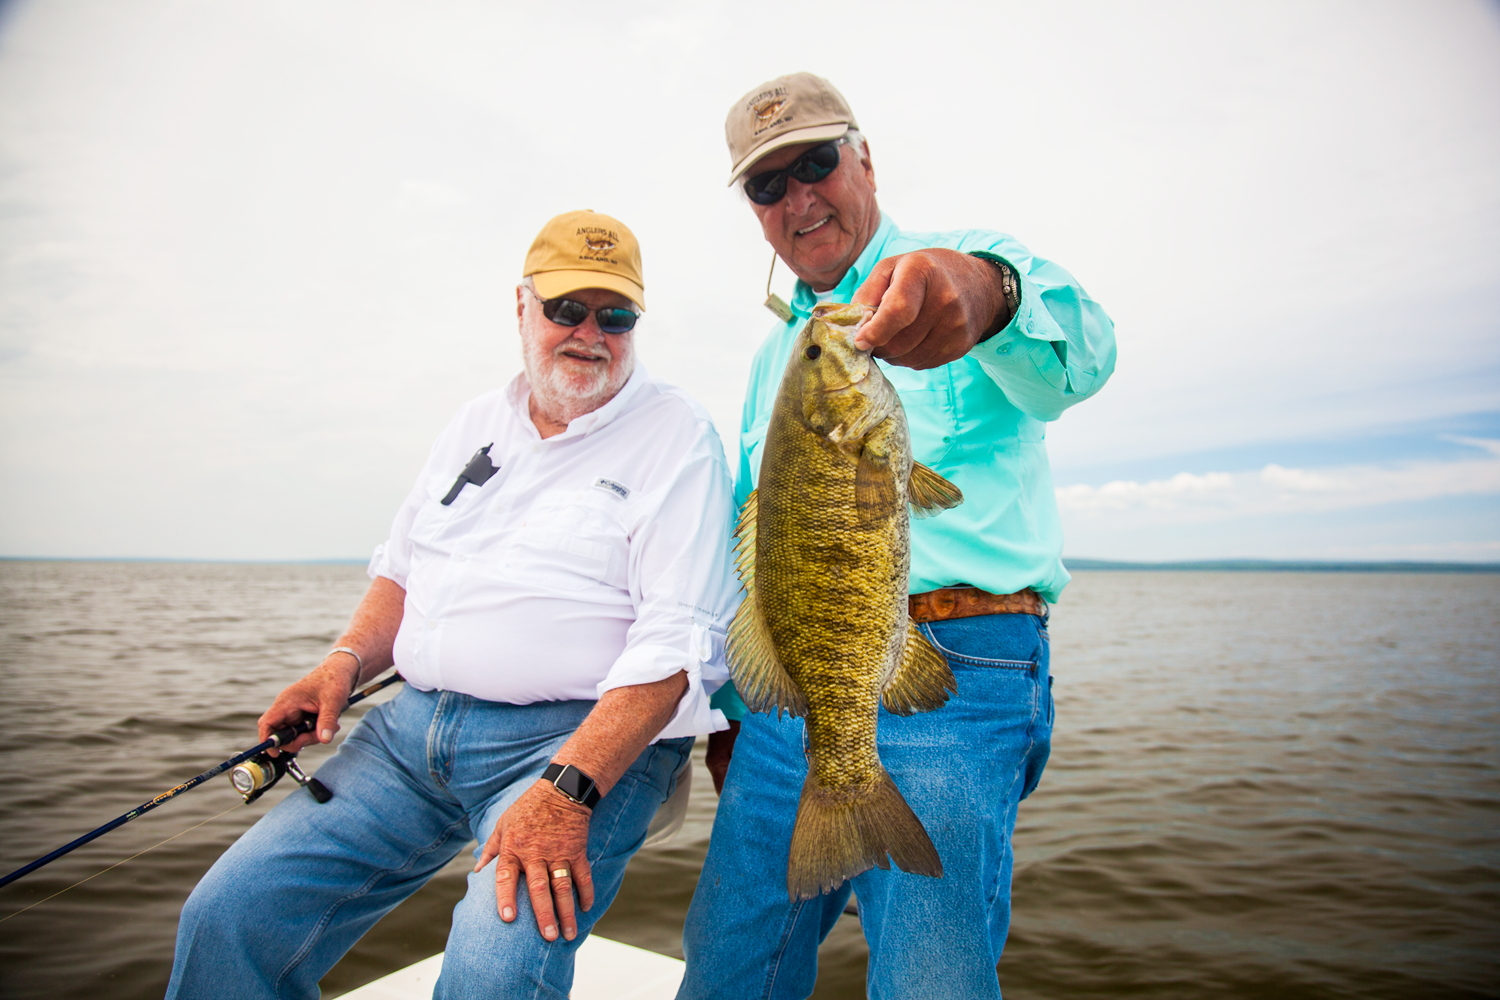 Larry and Marion from Stuttgart, Ark., recently spent four days fishing for bass on Chequamegon Bay with the folks from Anglers All in Ashland. “The fishing was great, but Marion cooked us ribs one night and I'd have to say that was the highlight of the trip!” said guide Luke Kavajecz. (Photo courtesy of Luke Kavajecz)